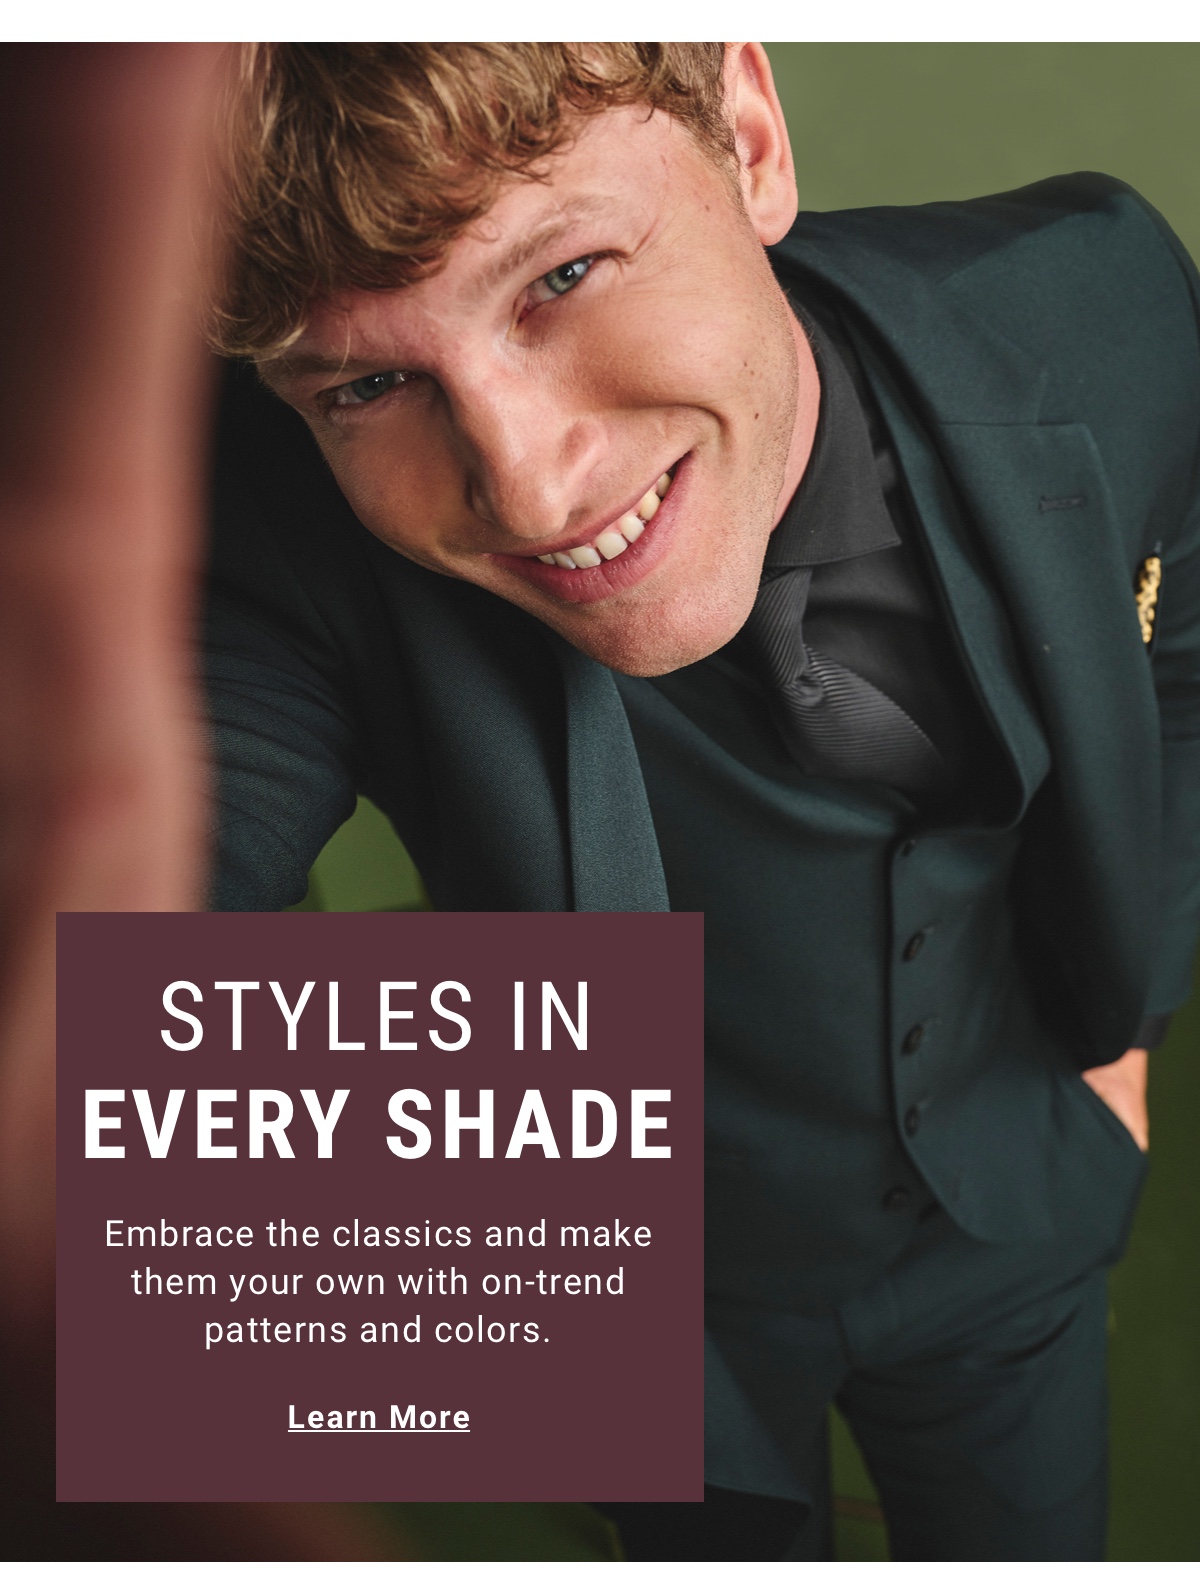 STYLES IN EVERY SHADE - Learn More